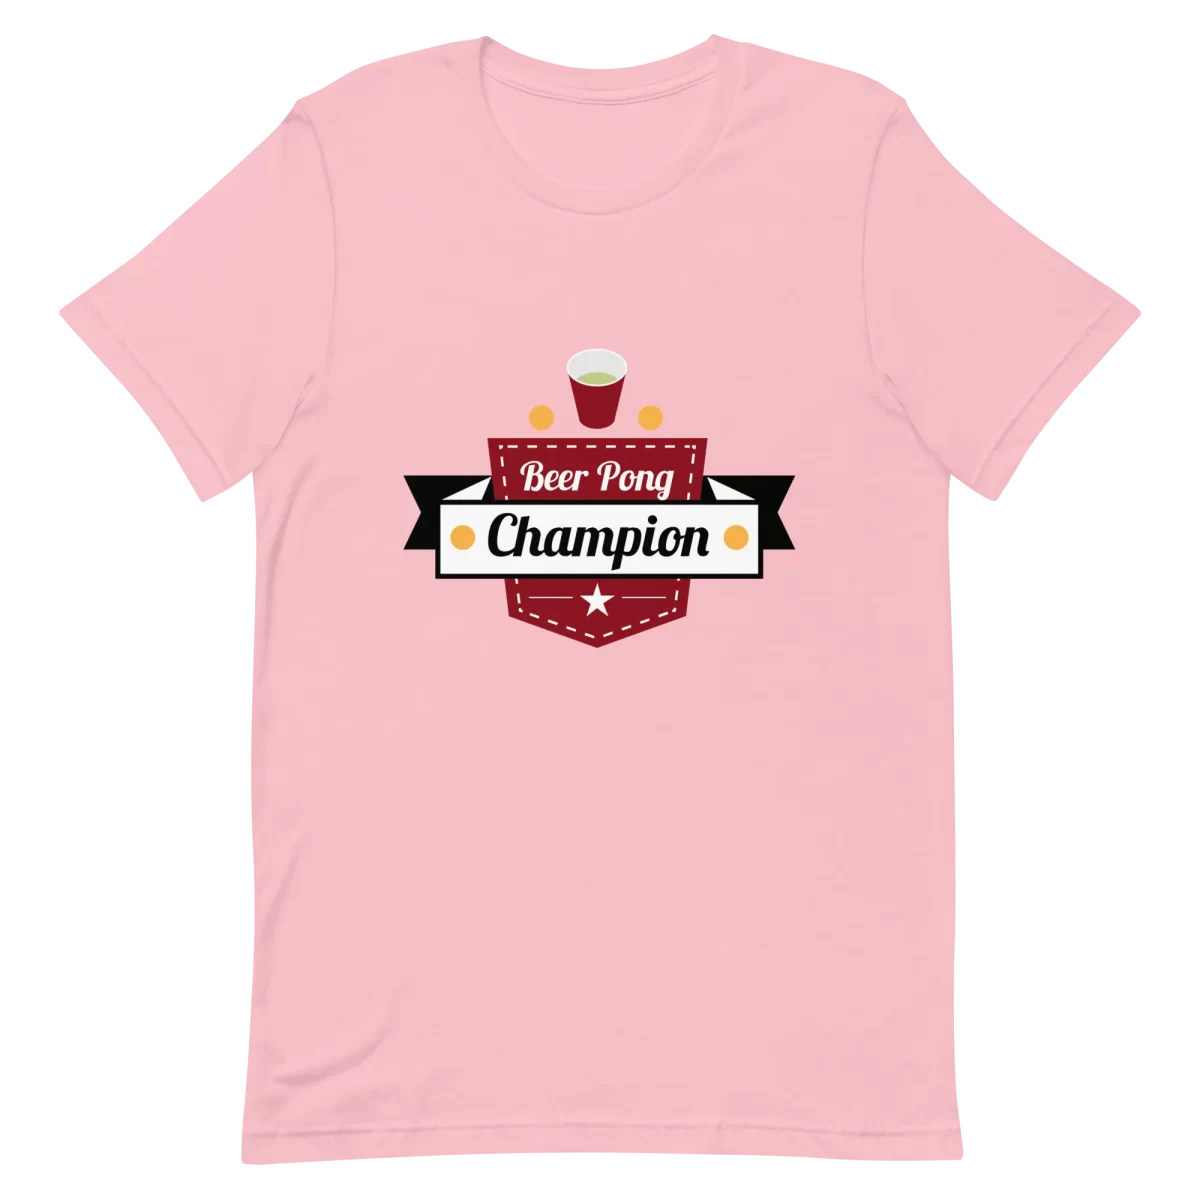 Unisex T-Shirt - Beer Pong Champion - Pink